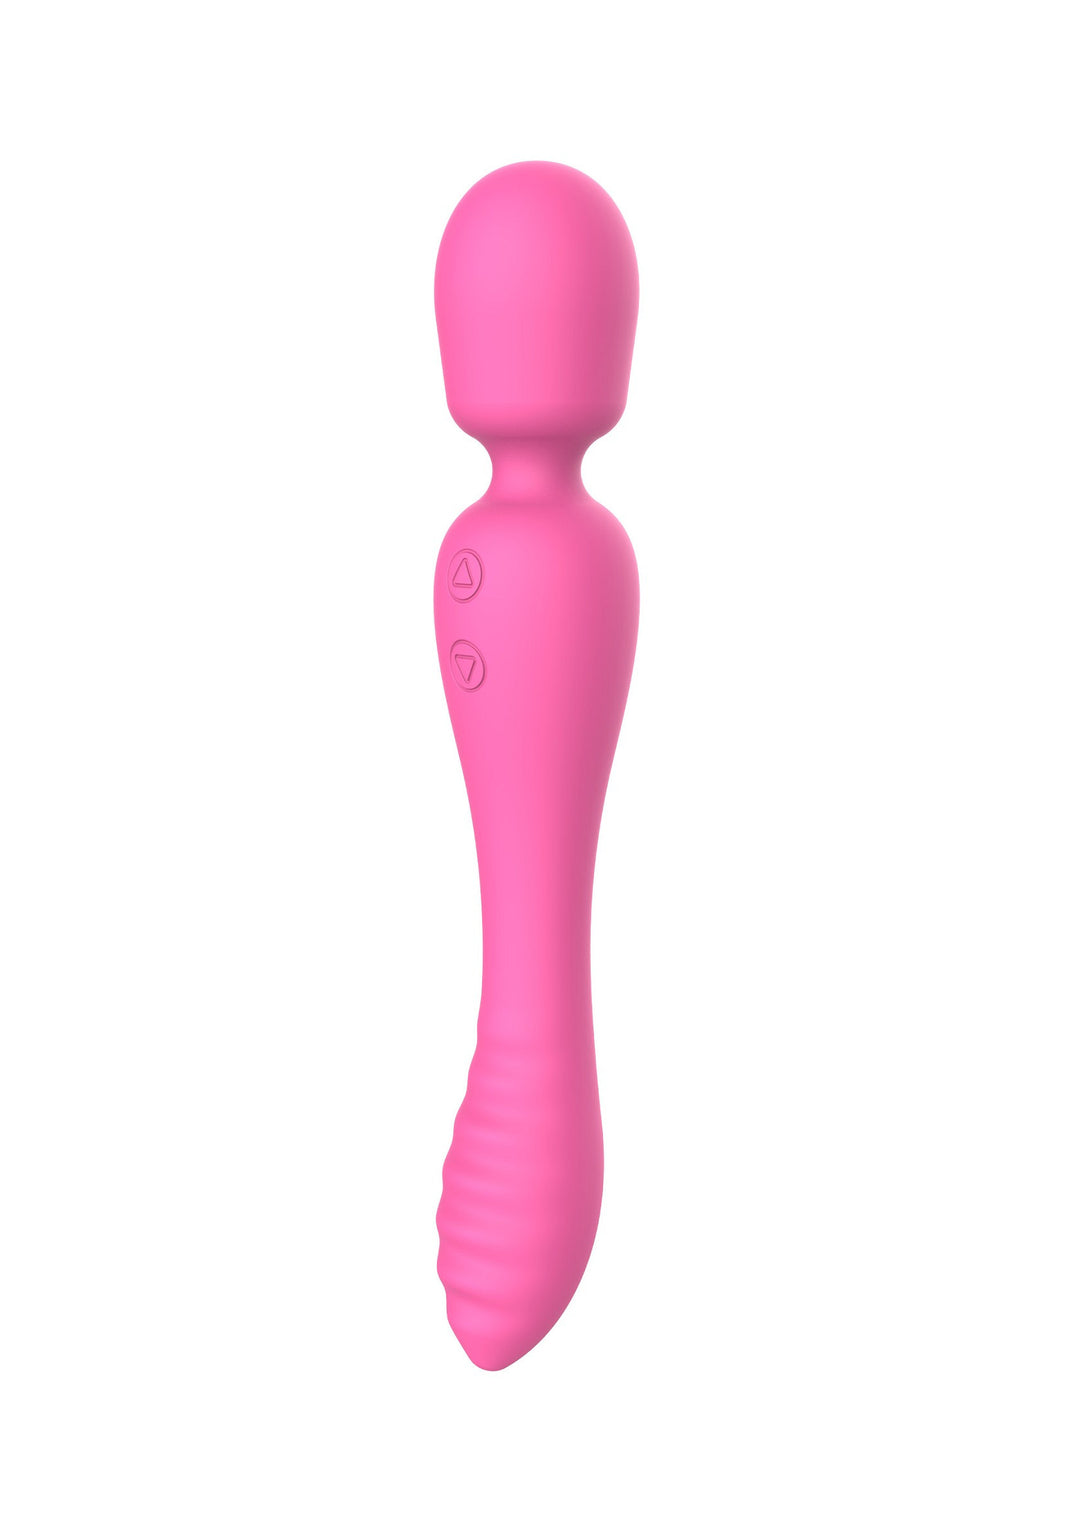 Vibrator wand The Evermore 2 in 1 Massager